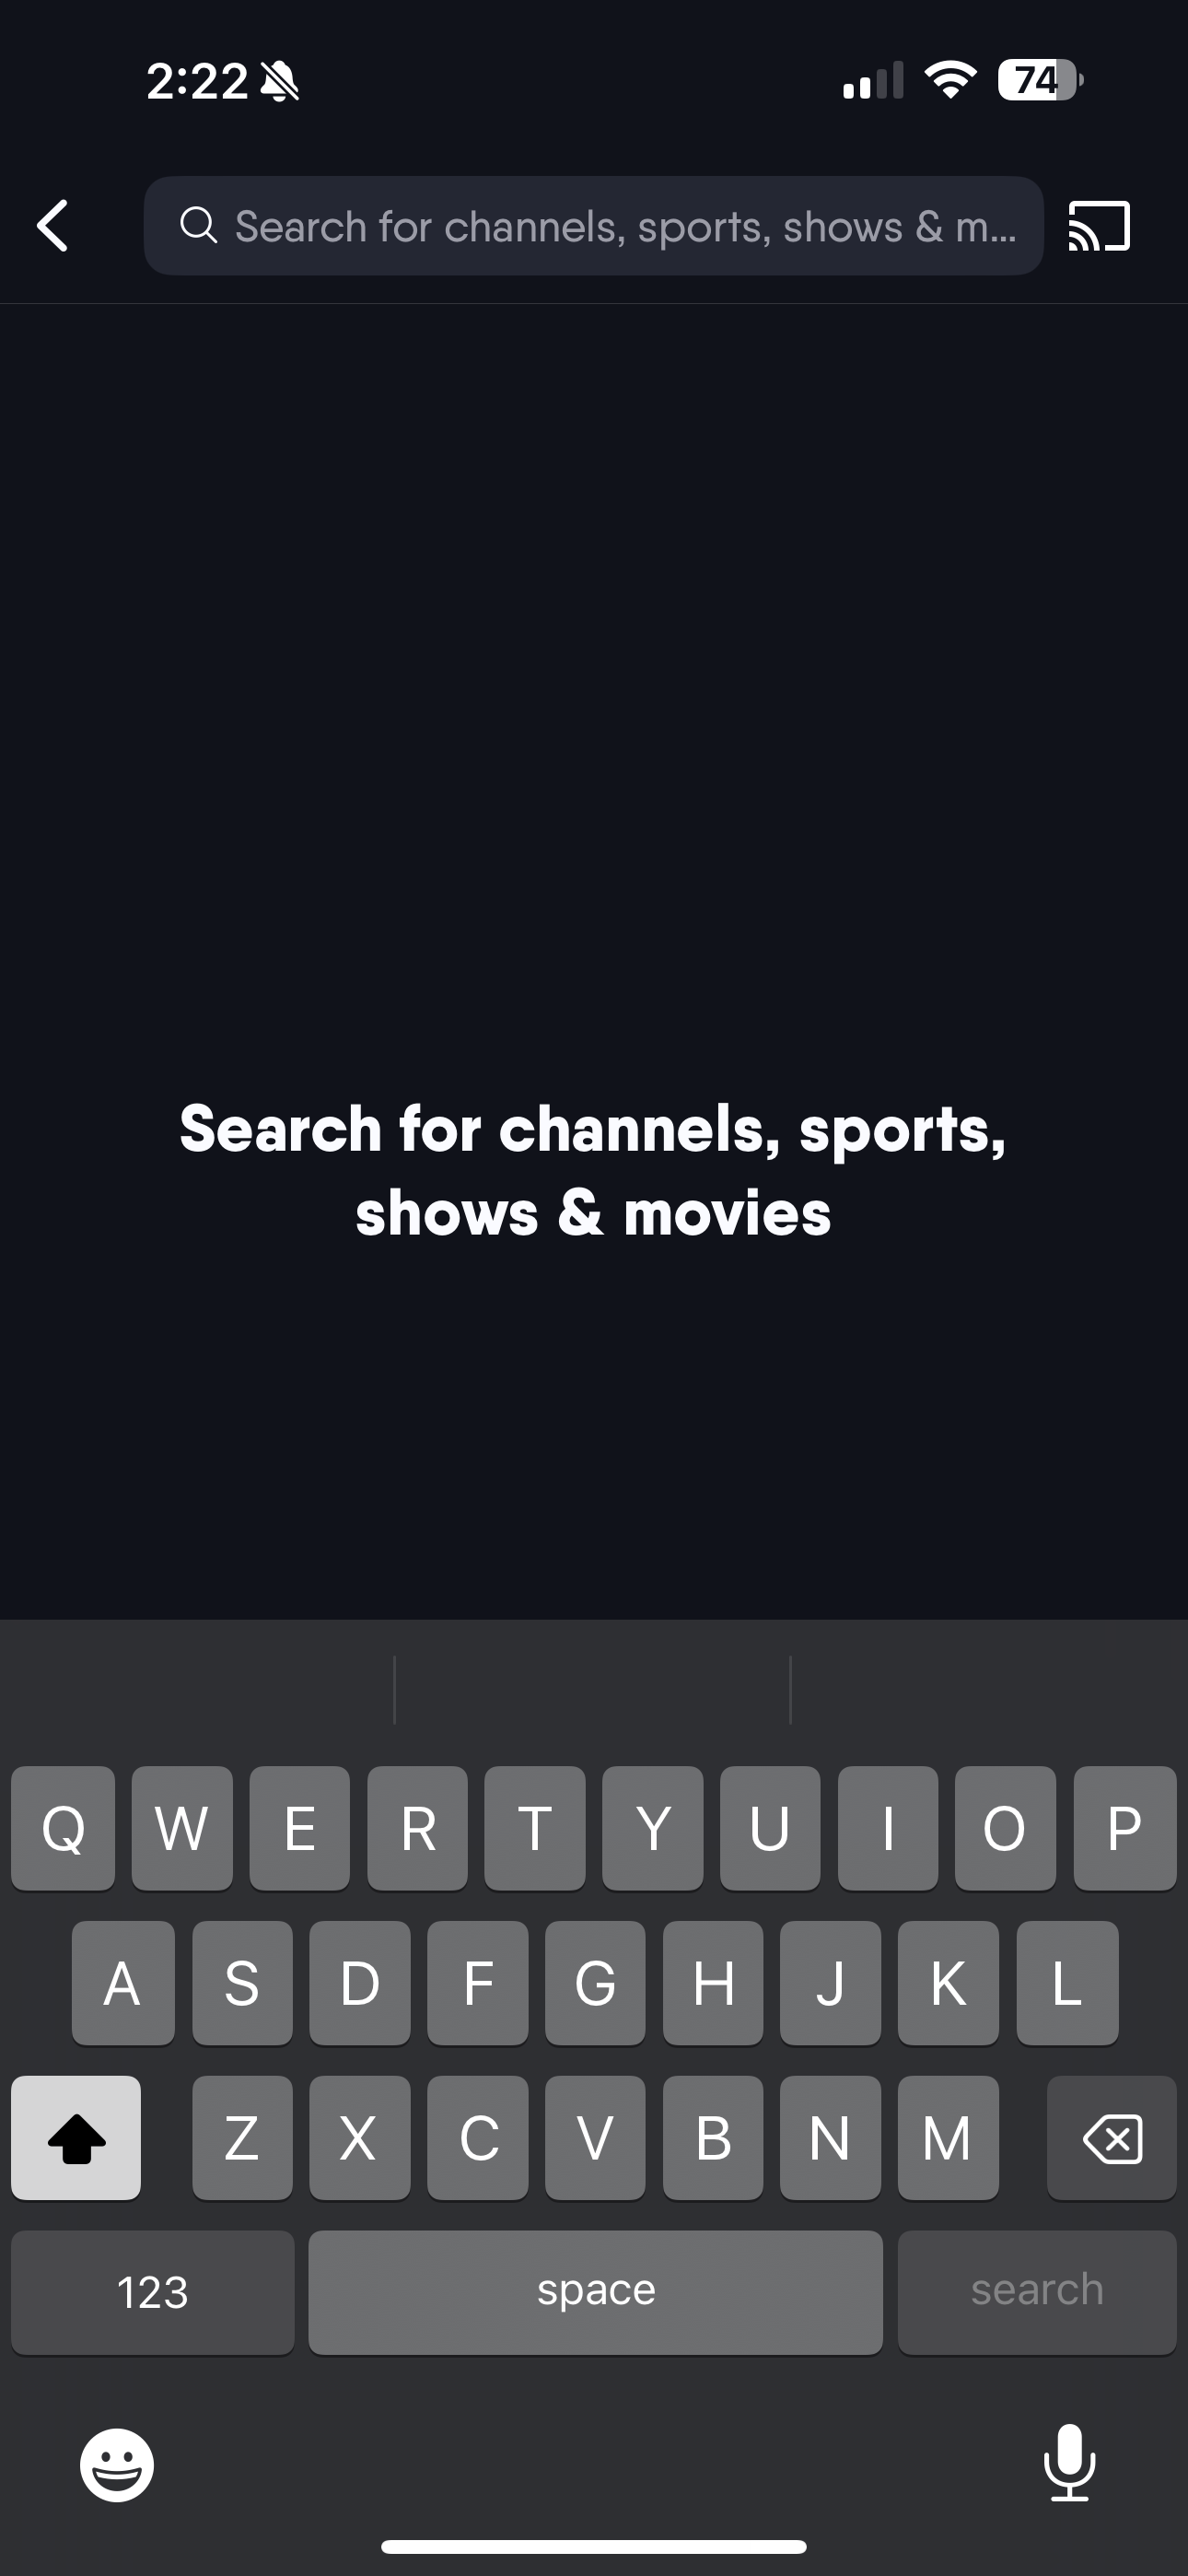 SEARCH screen of the FuboTV app on iOS